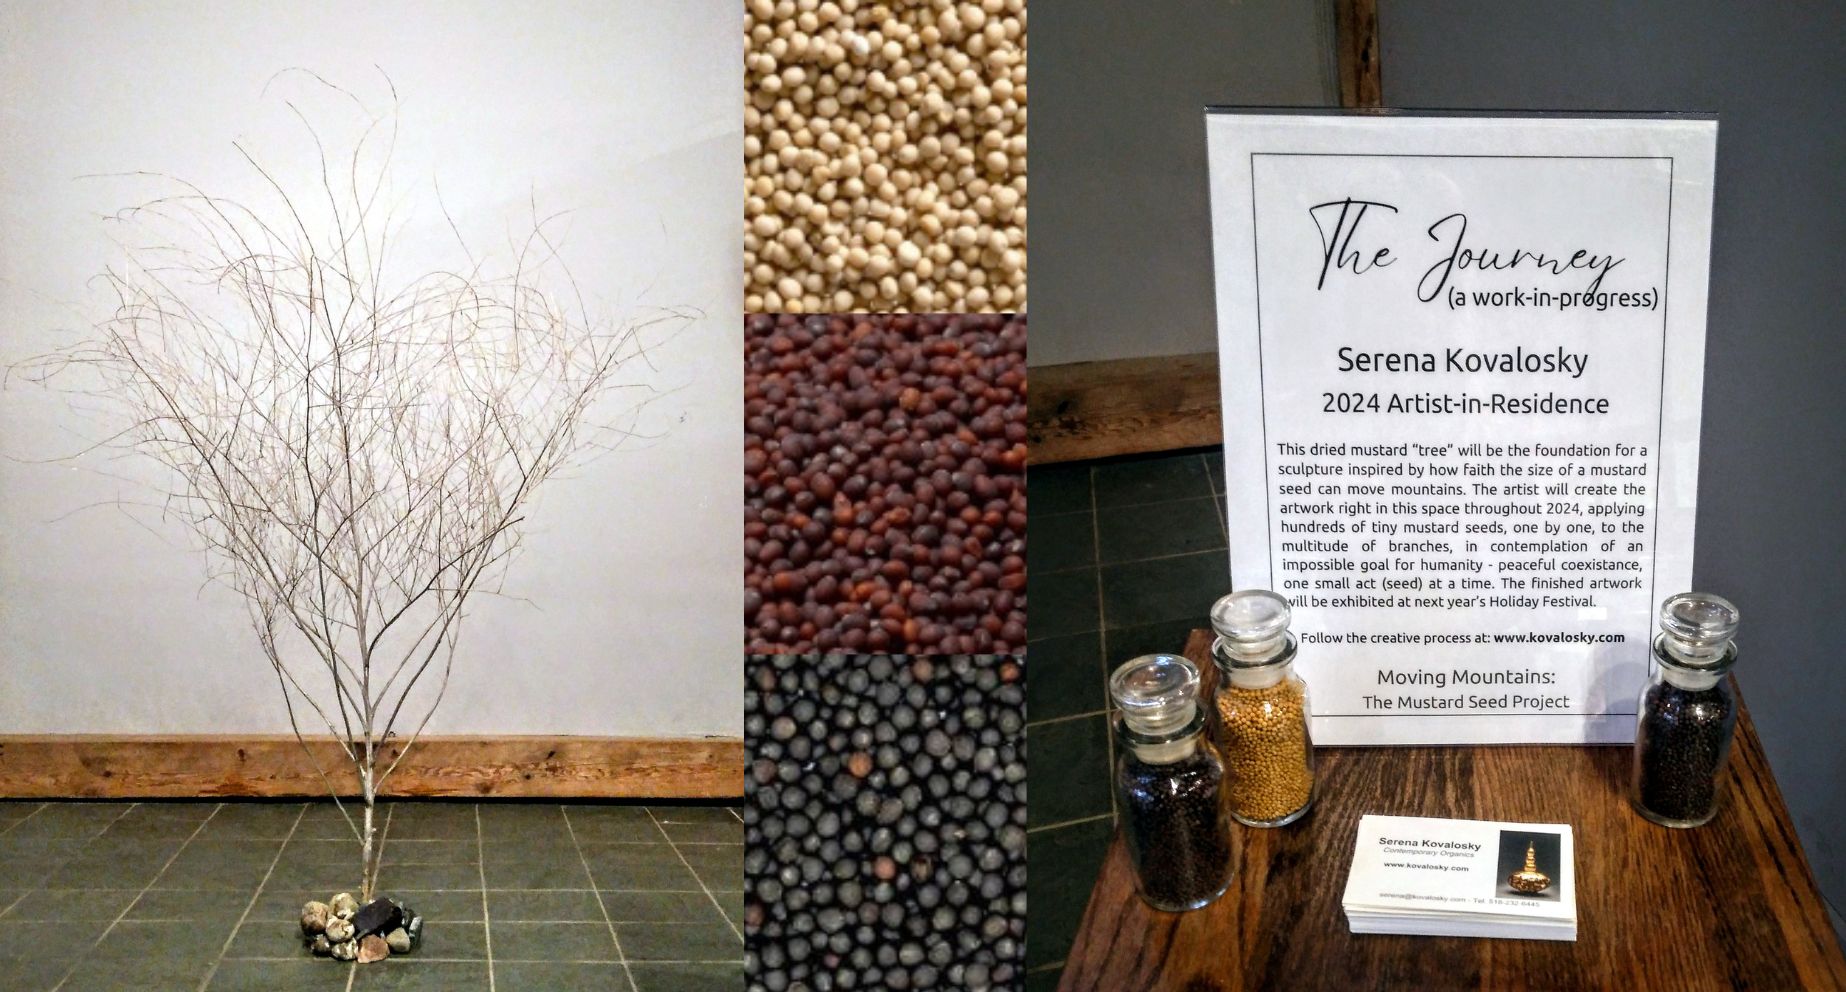 Dried Mustard Tree, seeds, and museum display board